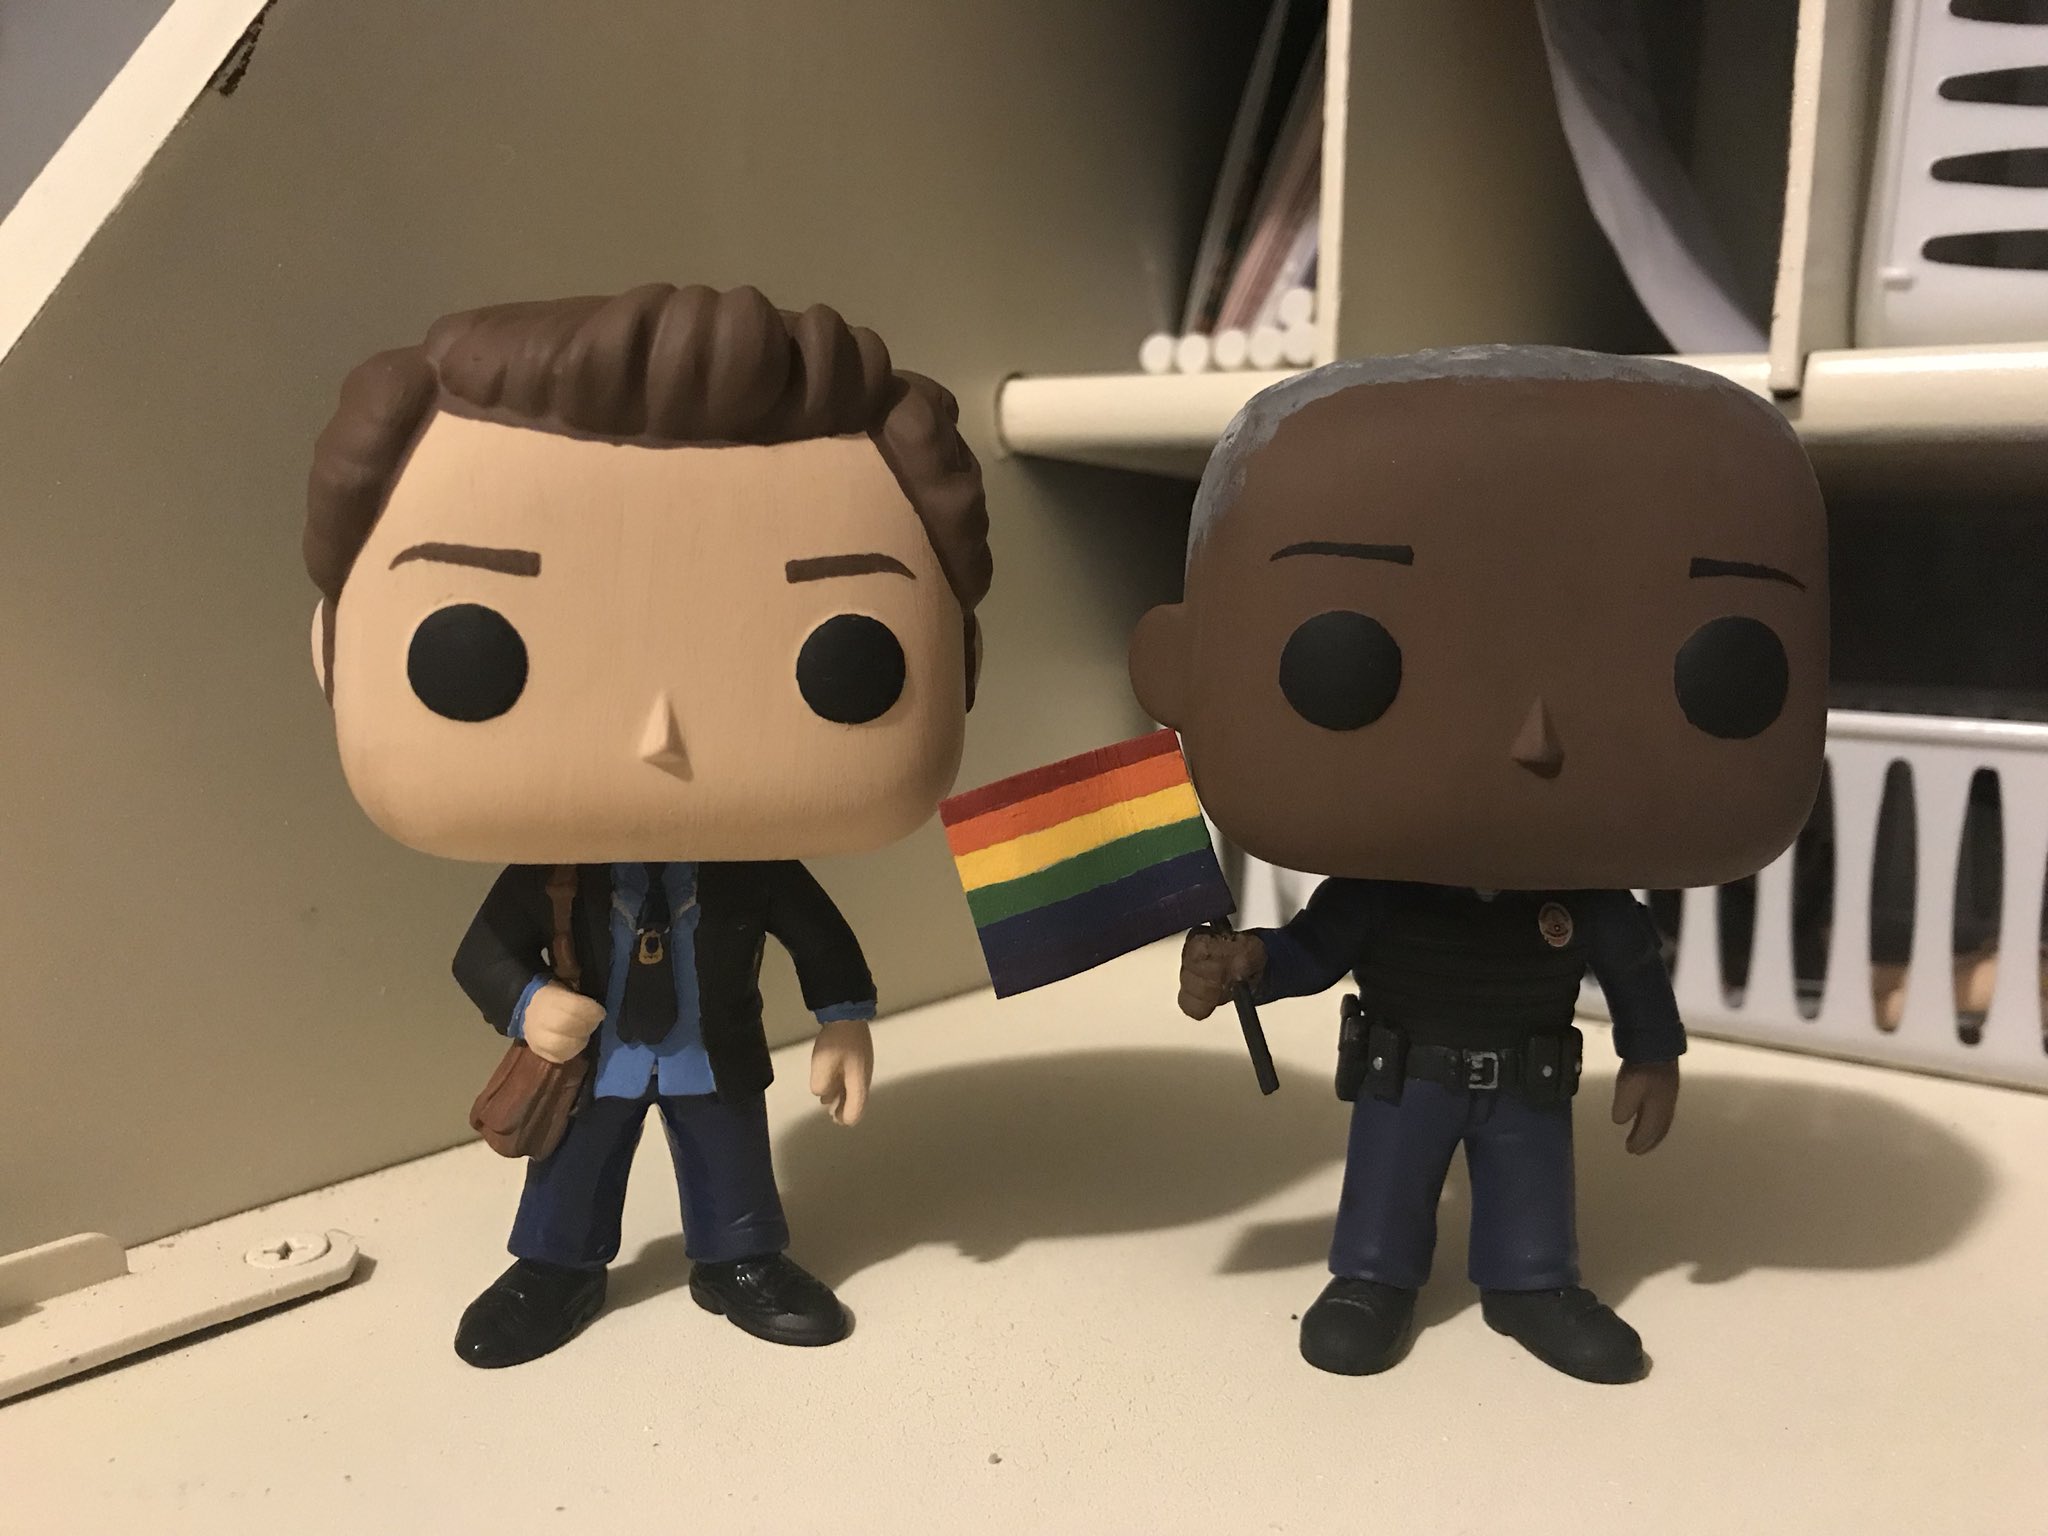 Kennedy Cannon on Twitter: "Captain Holt and Jake Peralta from Brooklyn  Nine-Nine 🚔🚨 https://t.co/40jnRiEoQk" / Twitter